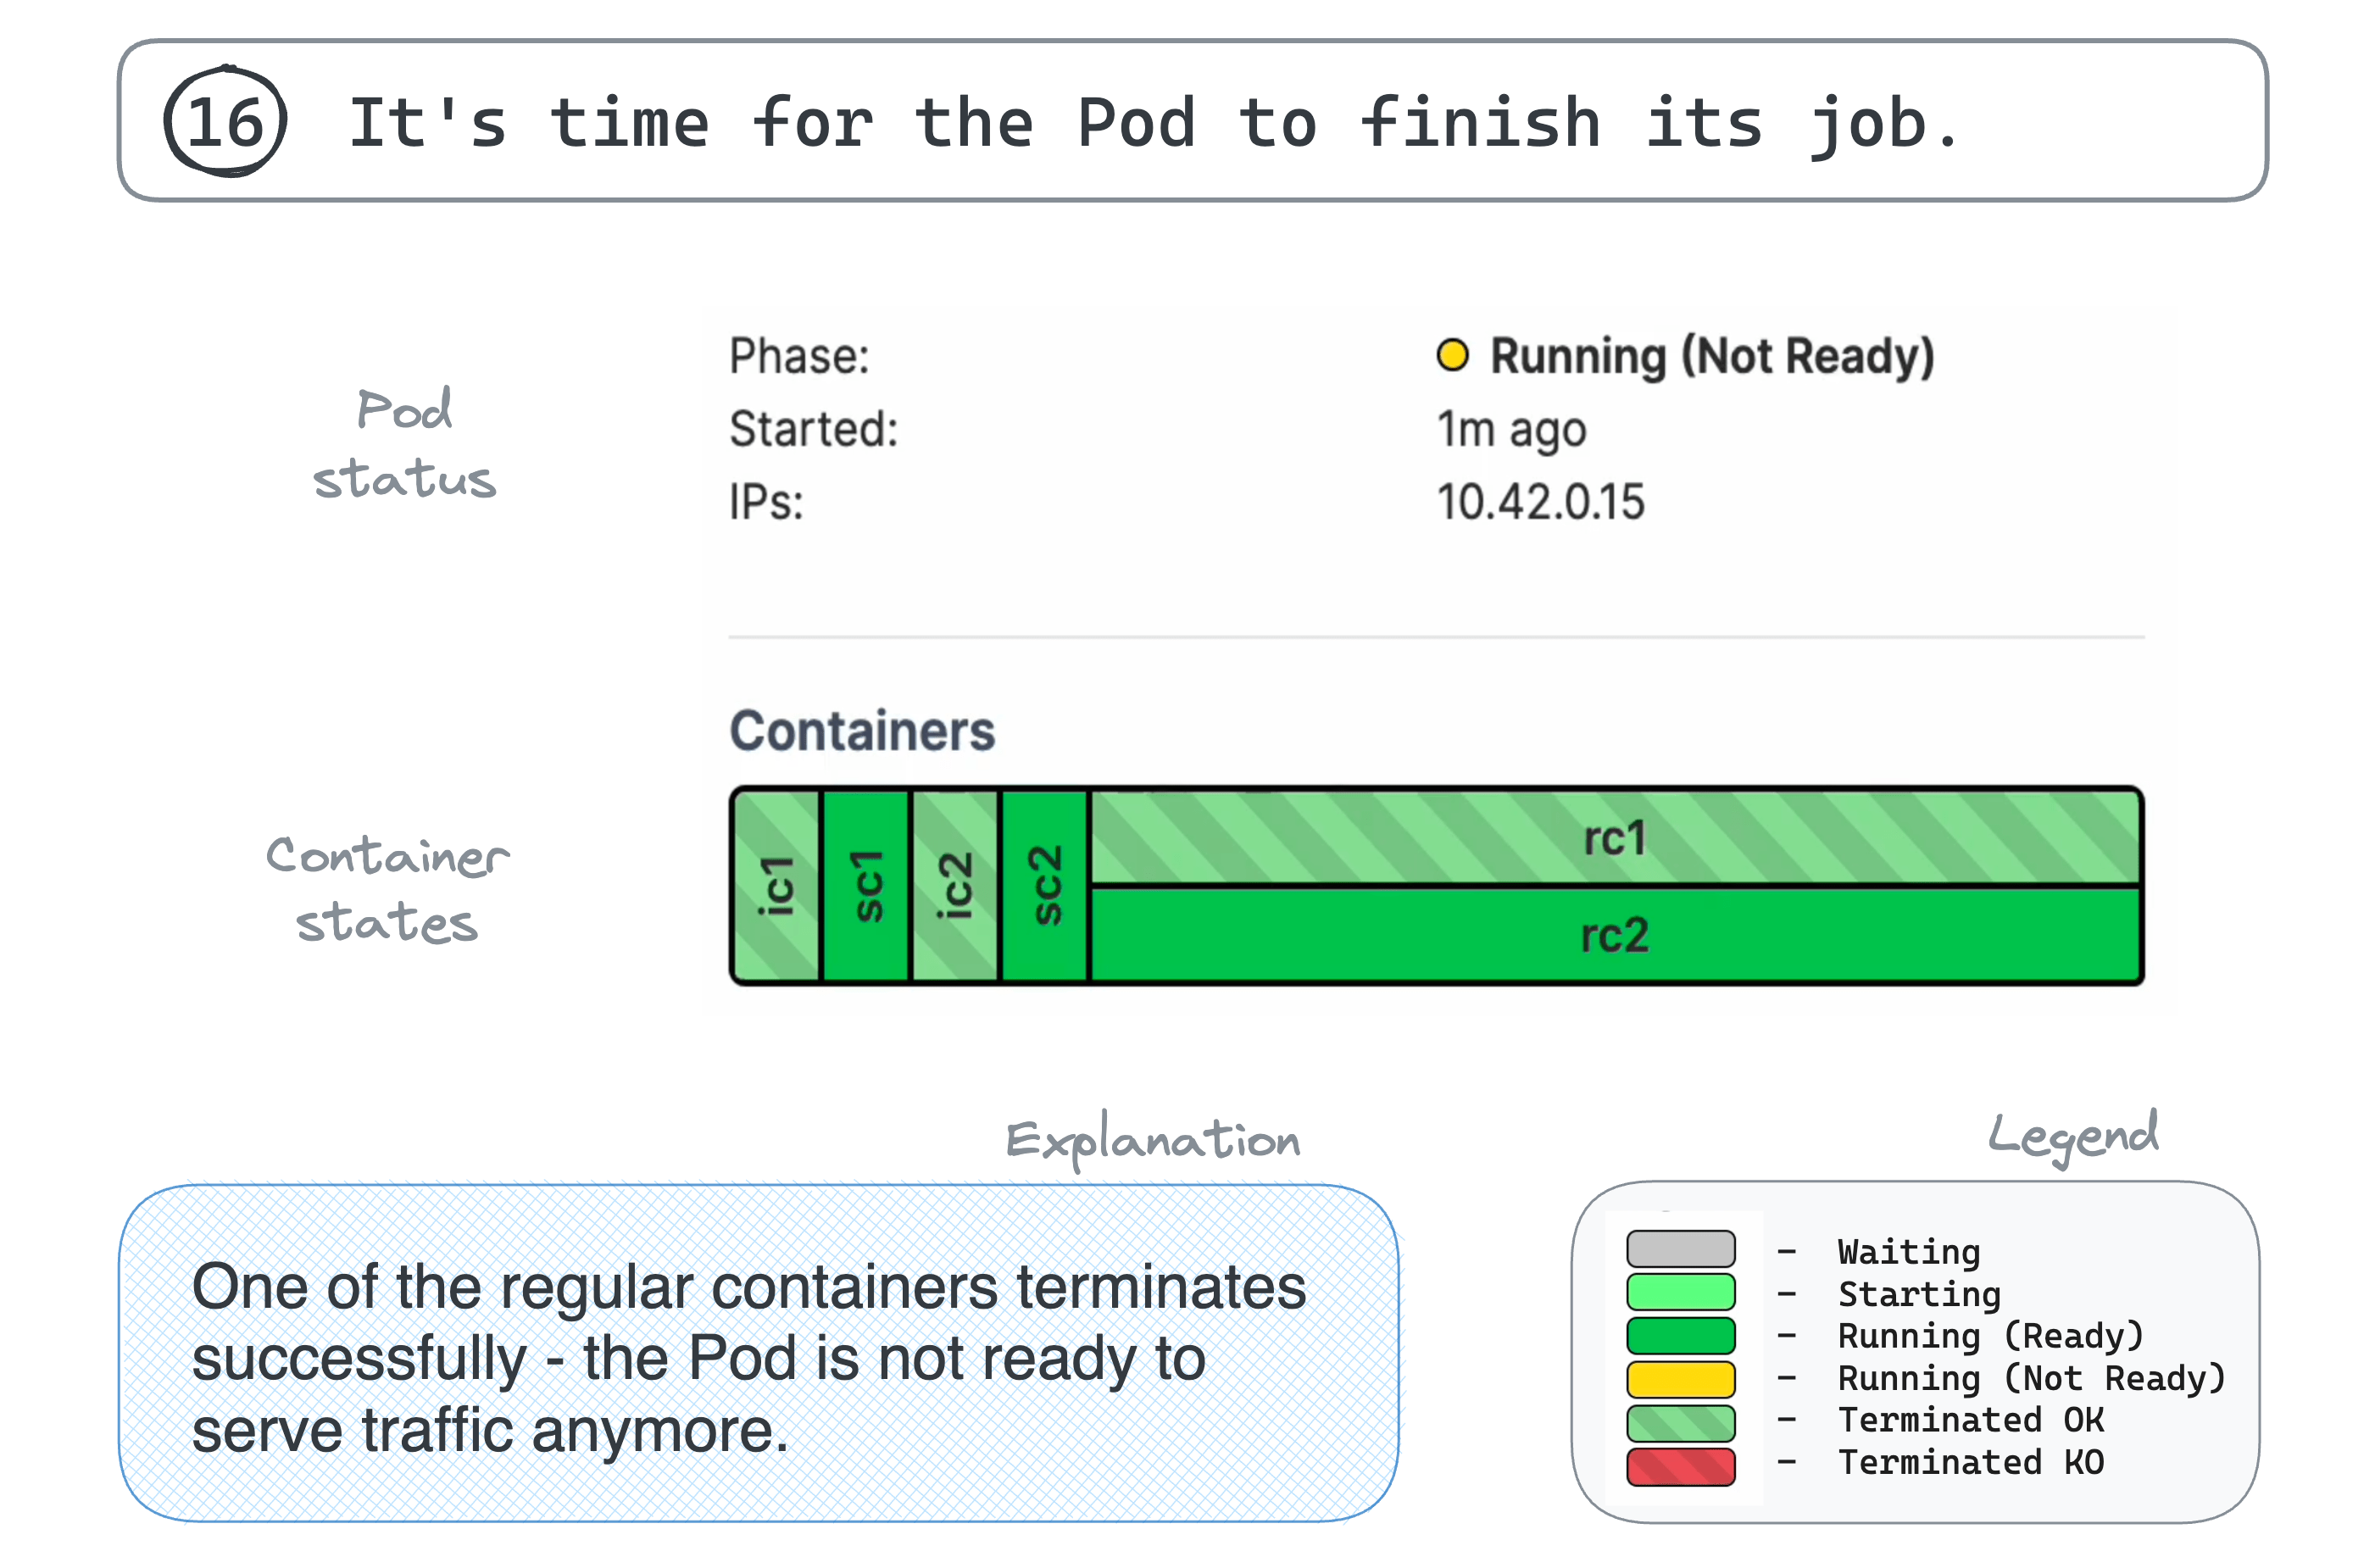 16. It's time for the Pod to finish its job.